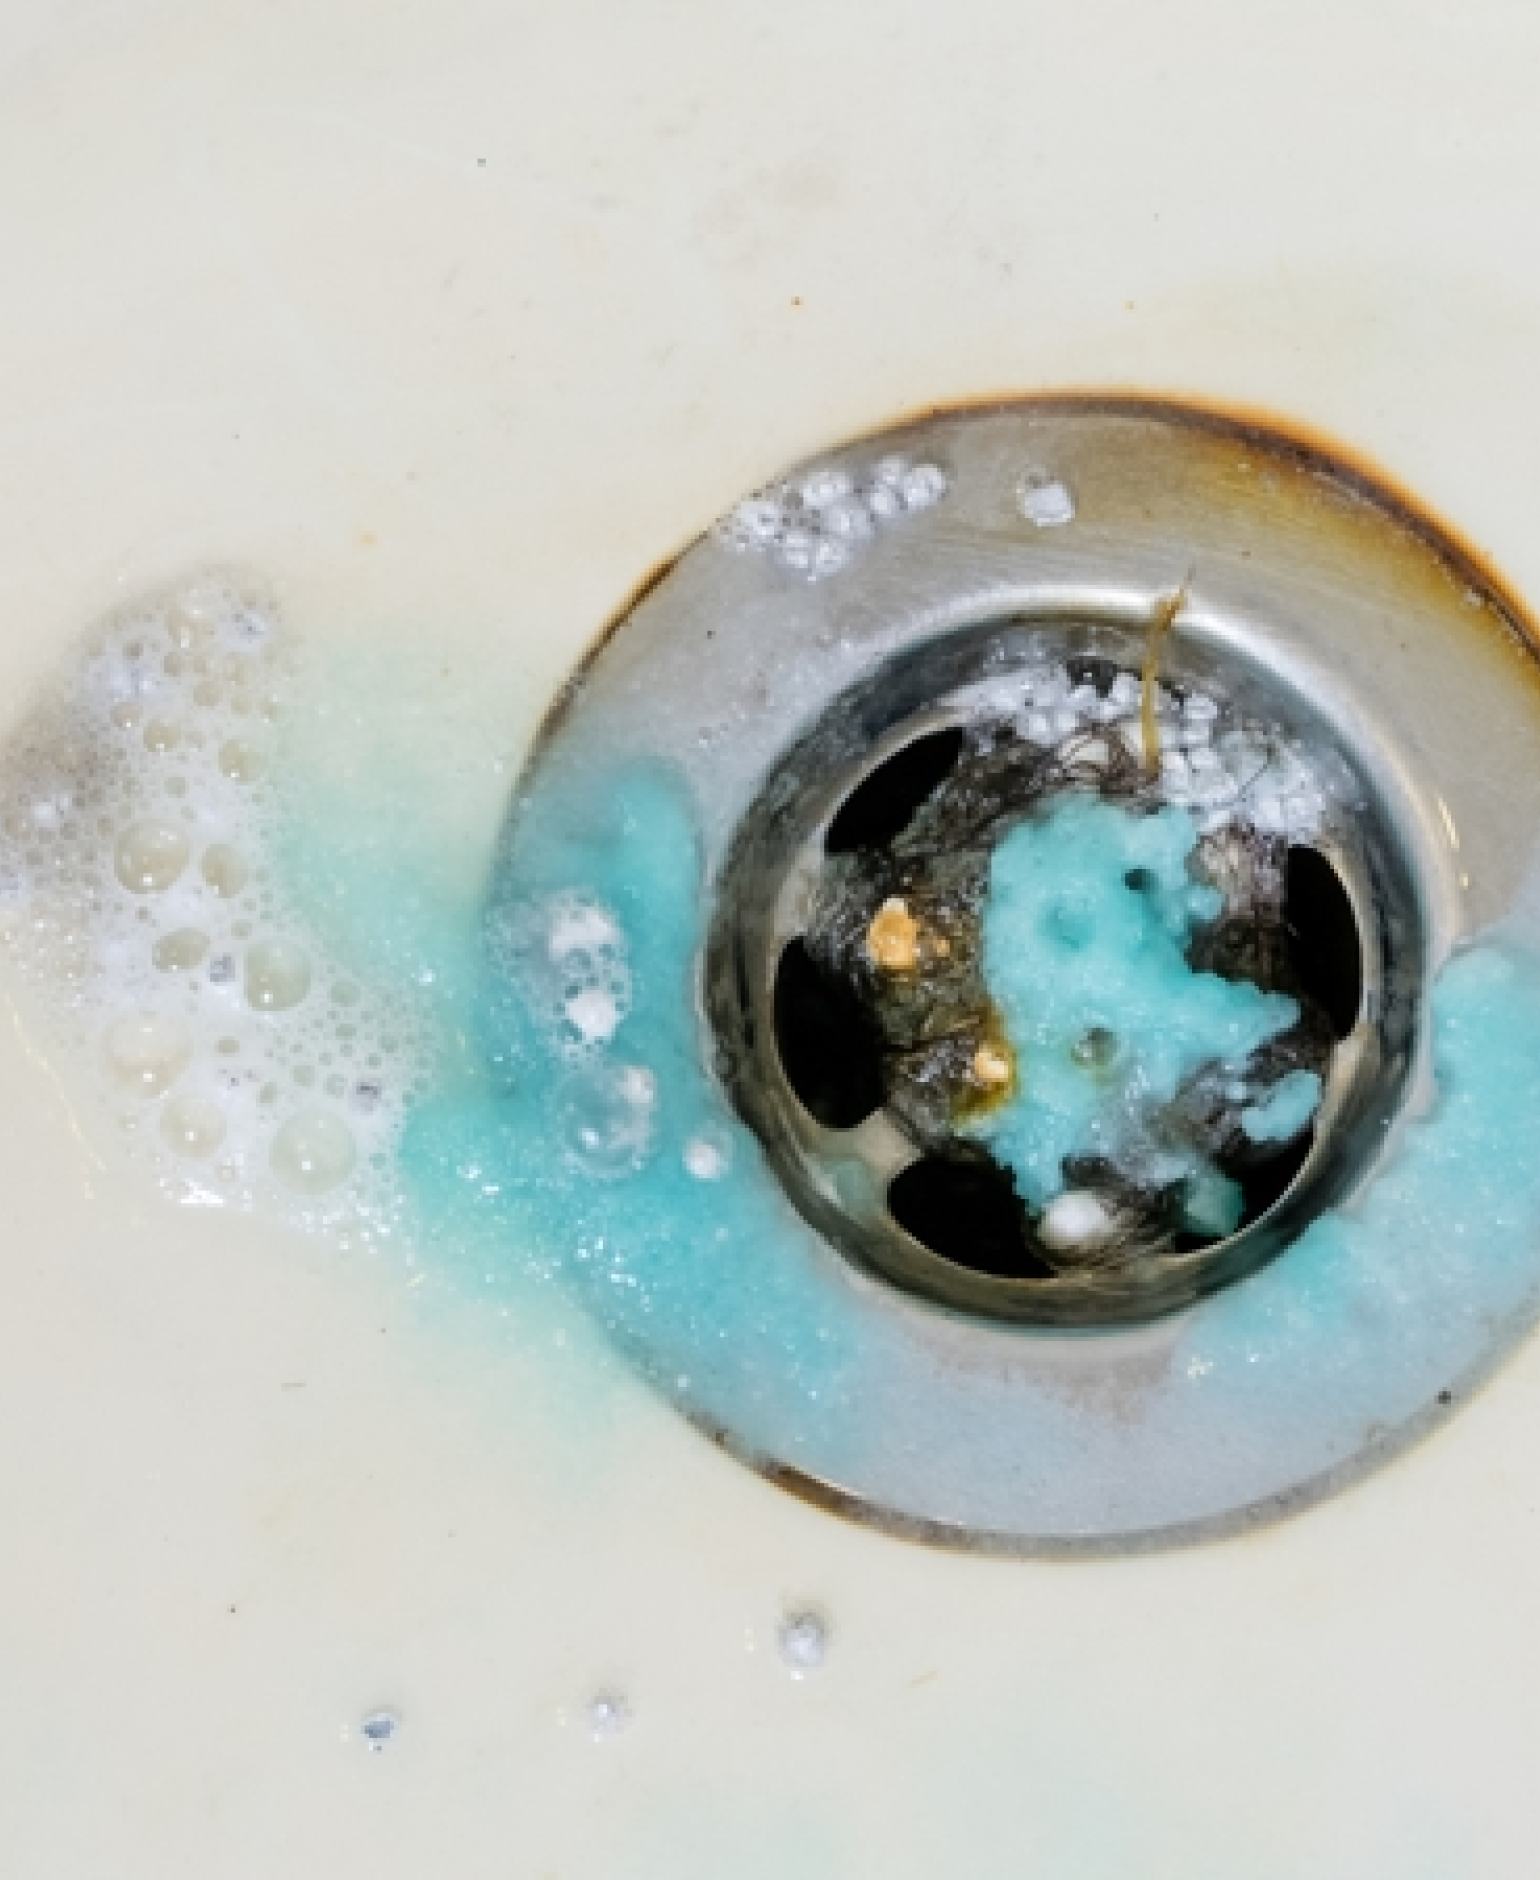 How To Unclog a Drain Without Harsh Chemicals